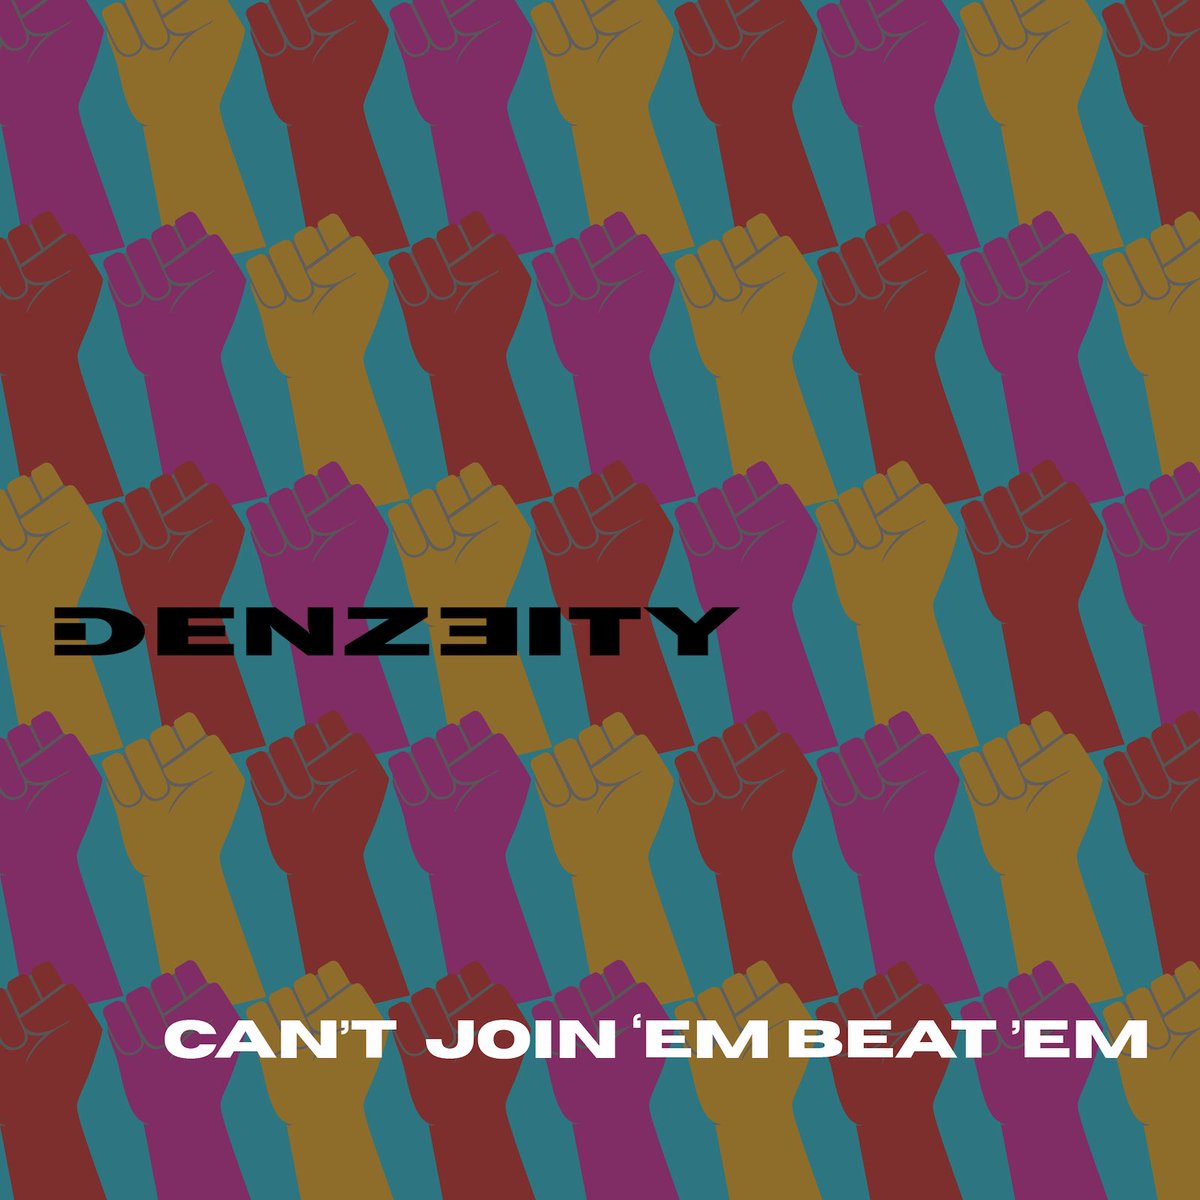 Our unconventional rock star and rule breaker @DenzeityMusic has just announced his new single. Can’t Join ‘em Beat ‘em will be out April 5th. Stay tuned. 🤘🏼